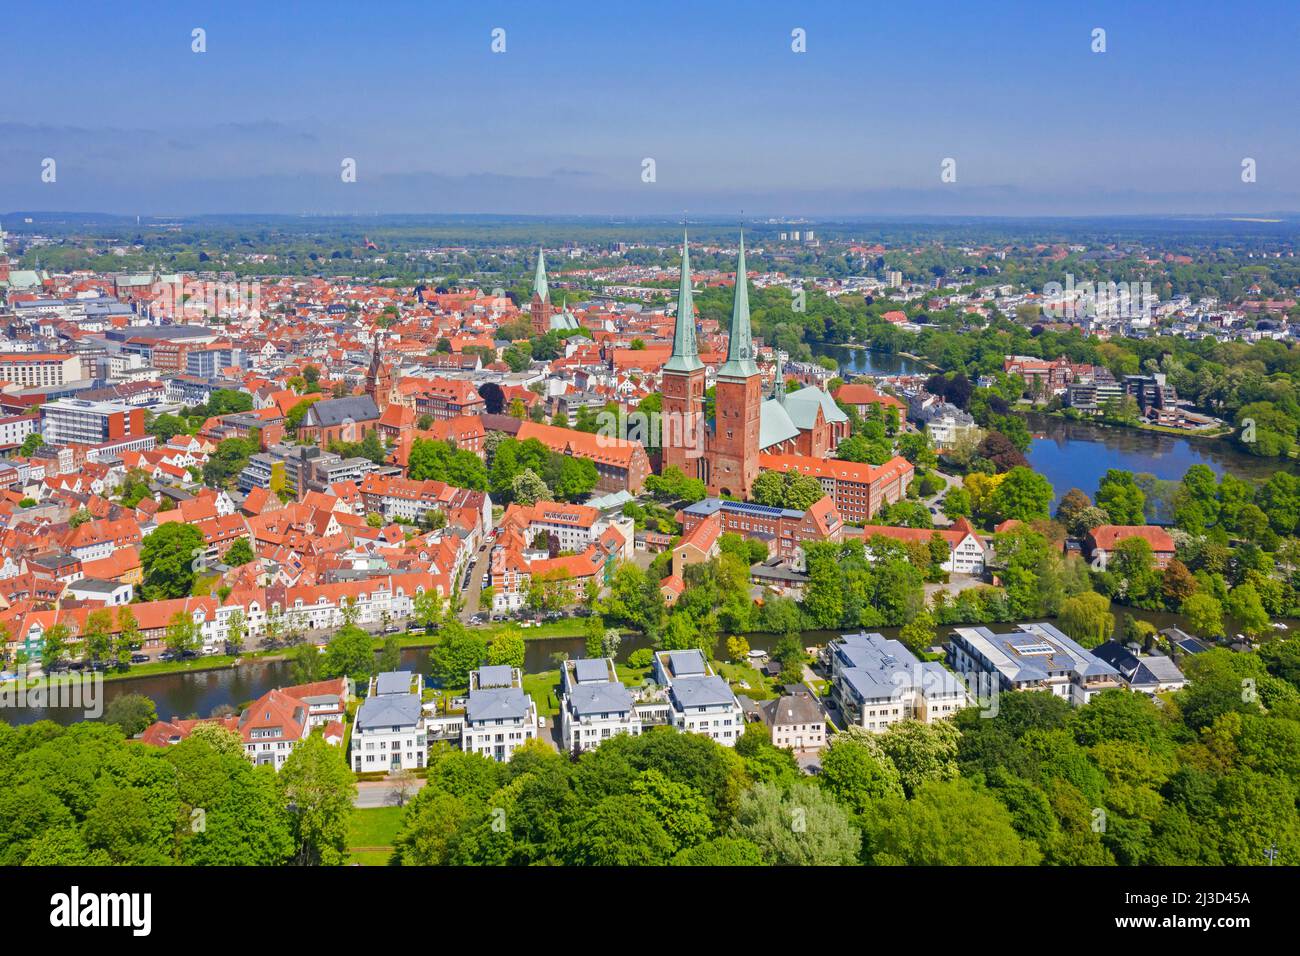 Aerial view over the Lübeck Cathedral / Dom zu Lübeck / Lübecker Dom and old town of the Hanseatic City of Lübeck, Schleswig-Holstein, Germany Stock Photo